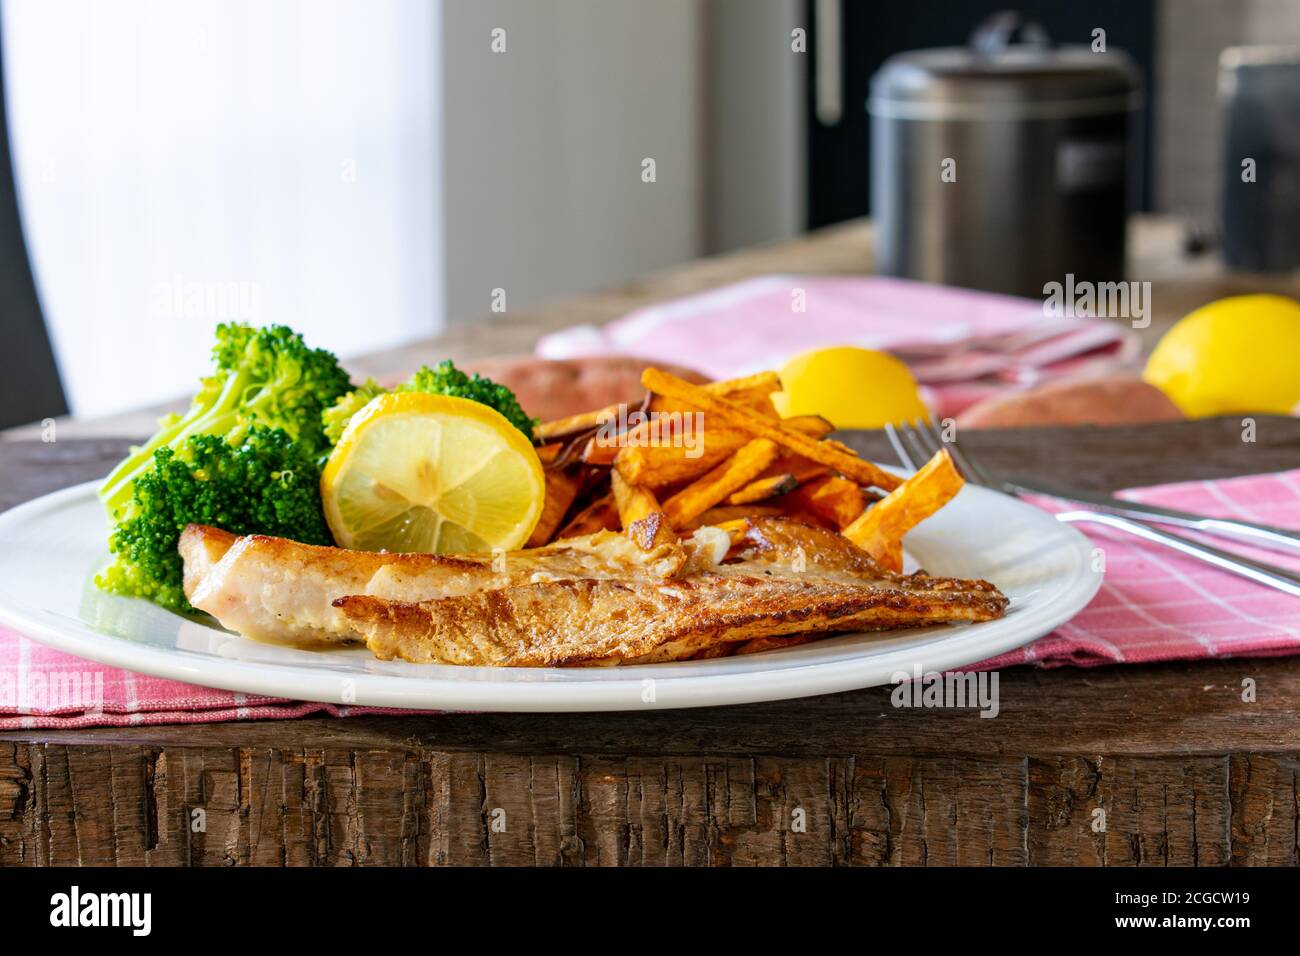 Fish with sweet potatoes and broccoli on a plate Stock Photo